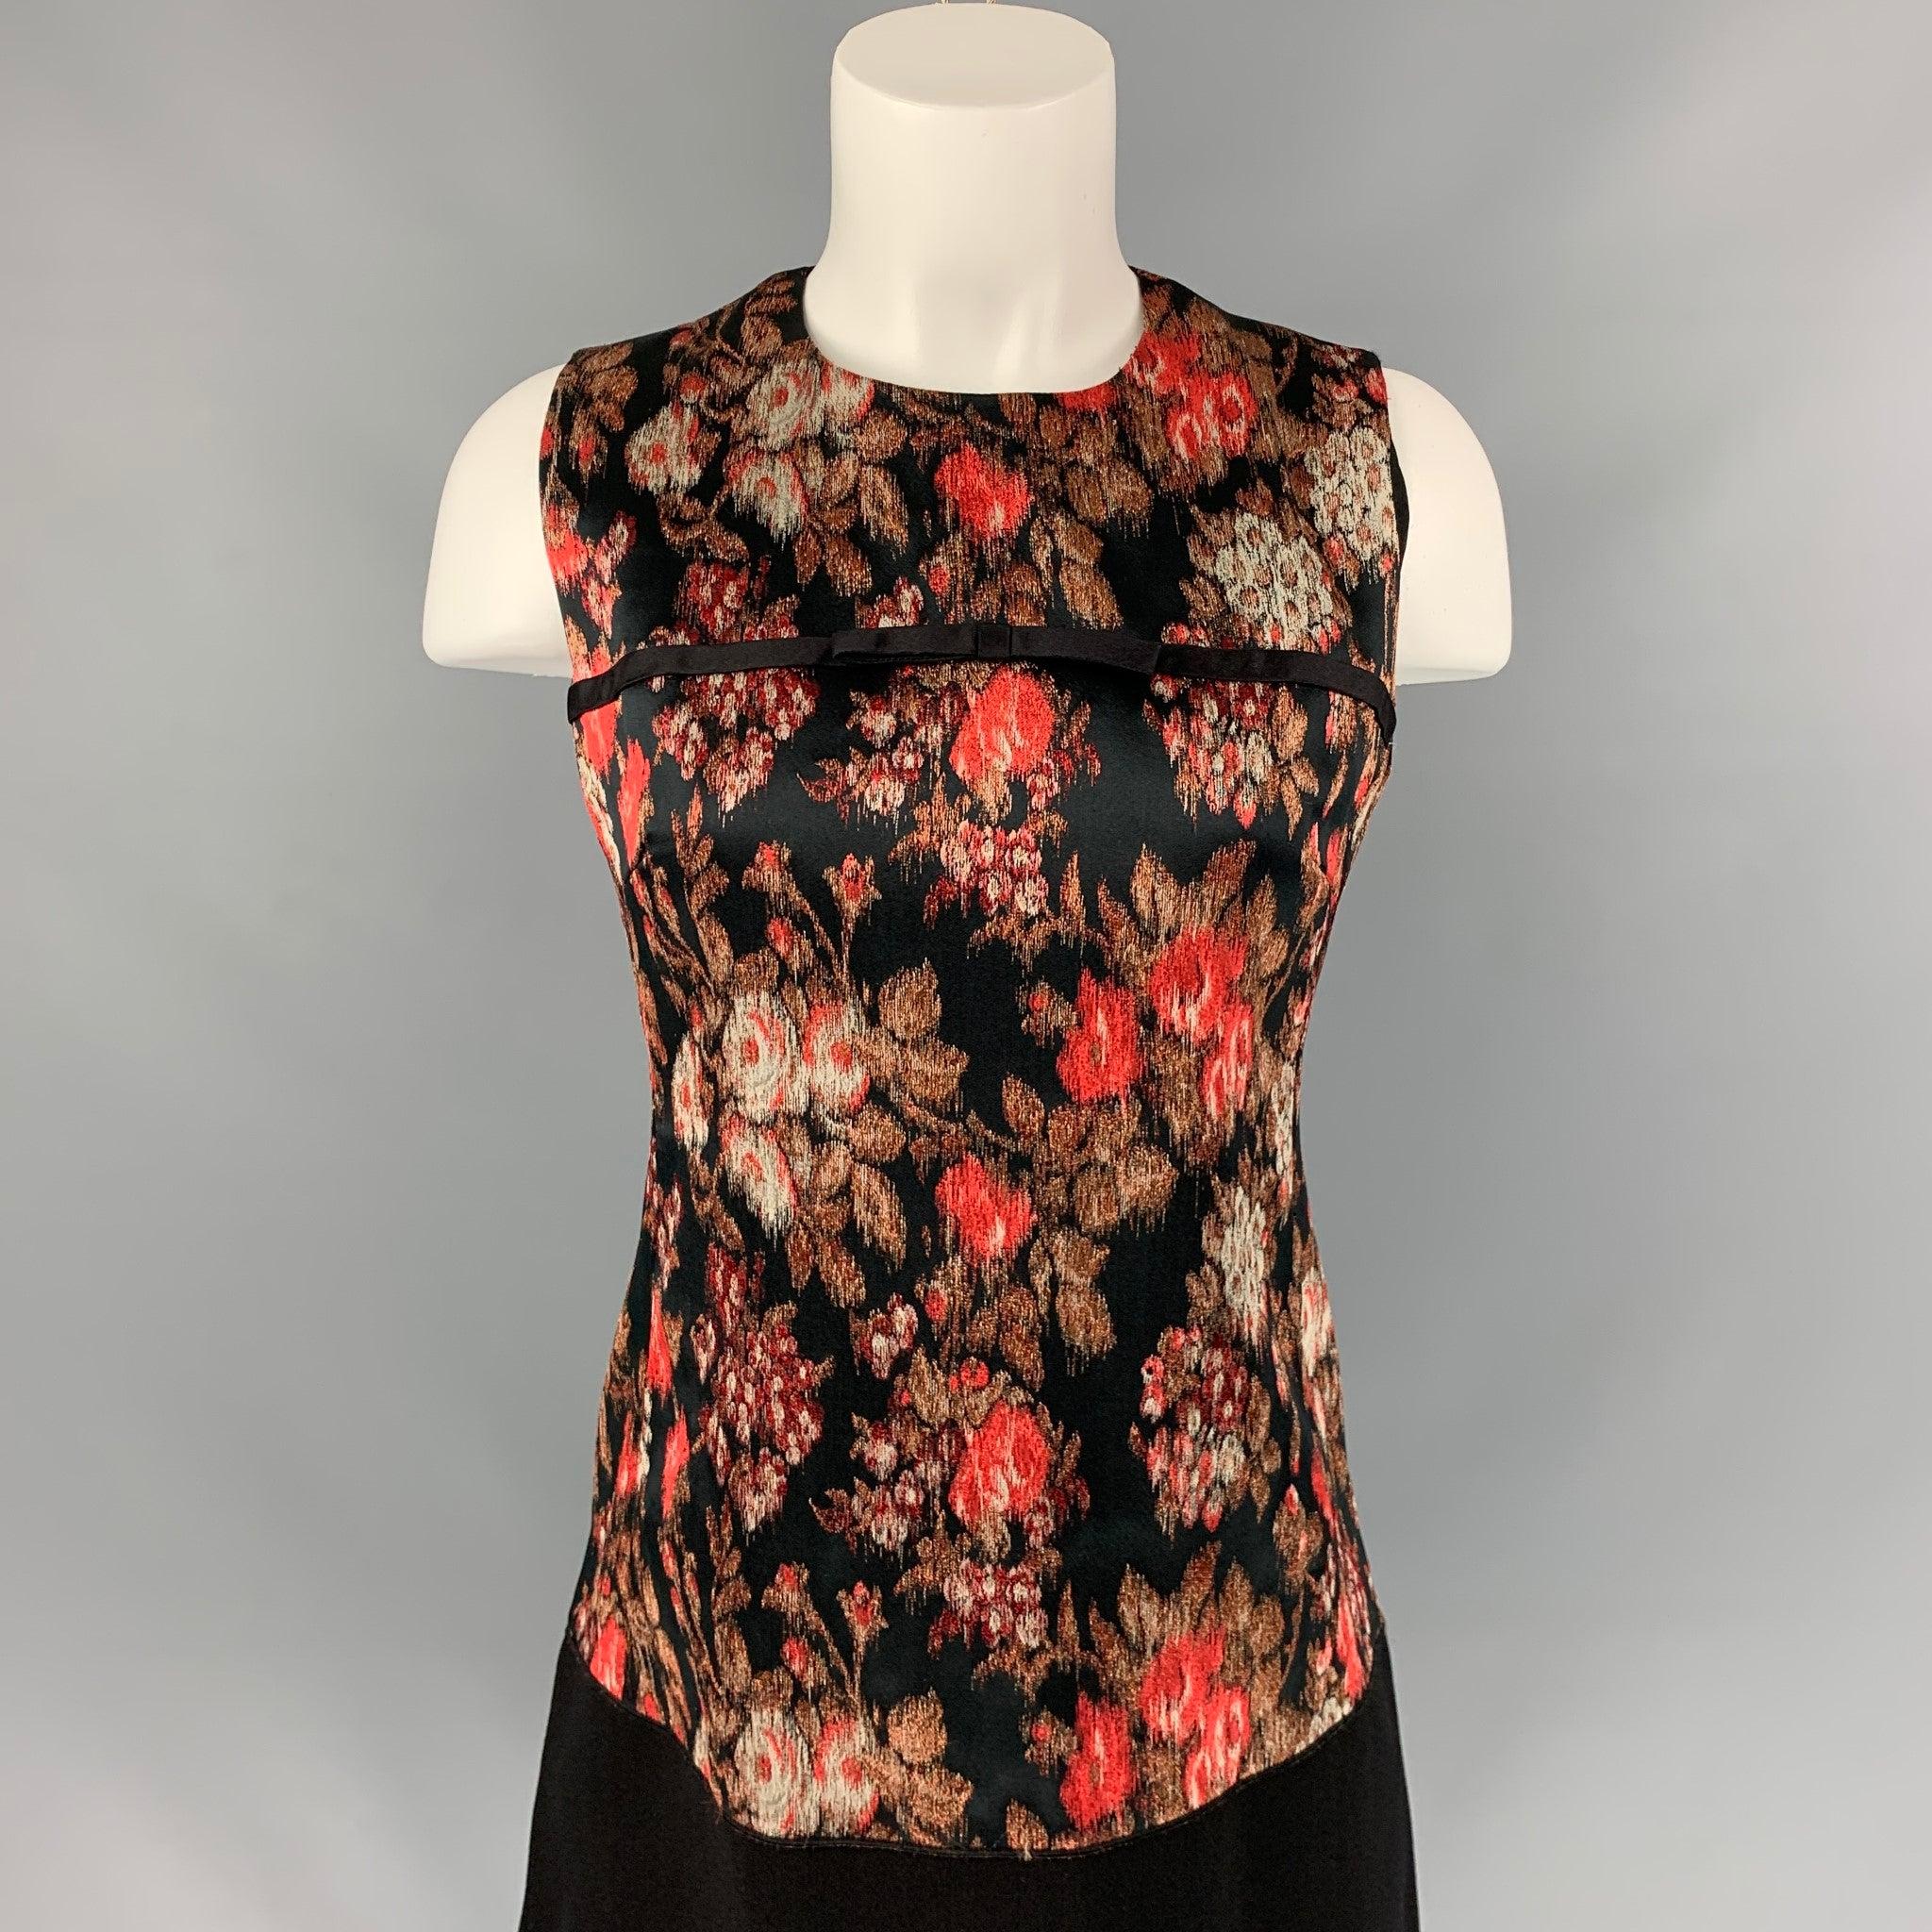 GIAMBATTISTA VALLI dress comes in a black & coral jacquard polyester blend with a slip liner featuring a shift style, bow detail, and a back zipper closure. Made in Italy.
Very Good
Pre-Owned Condition. 

Marked:   42/S 

Measurements: 
 
Shoulder: